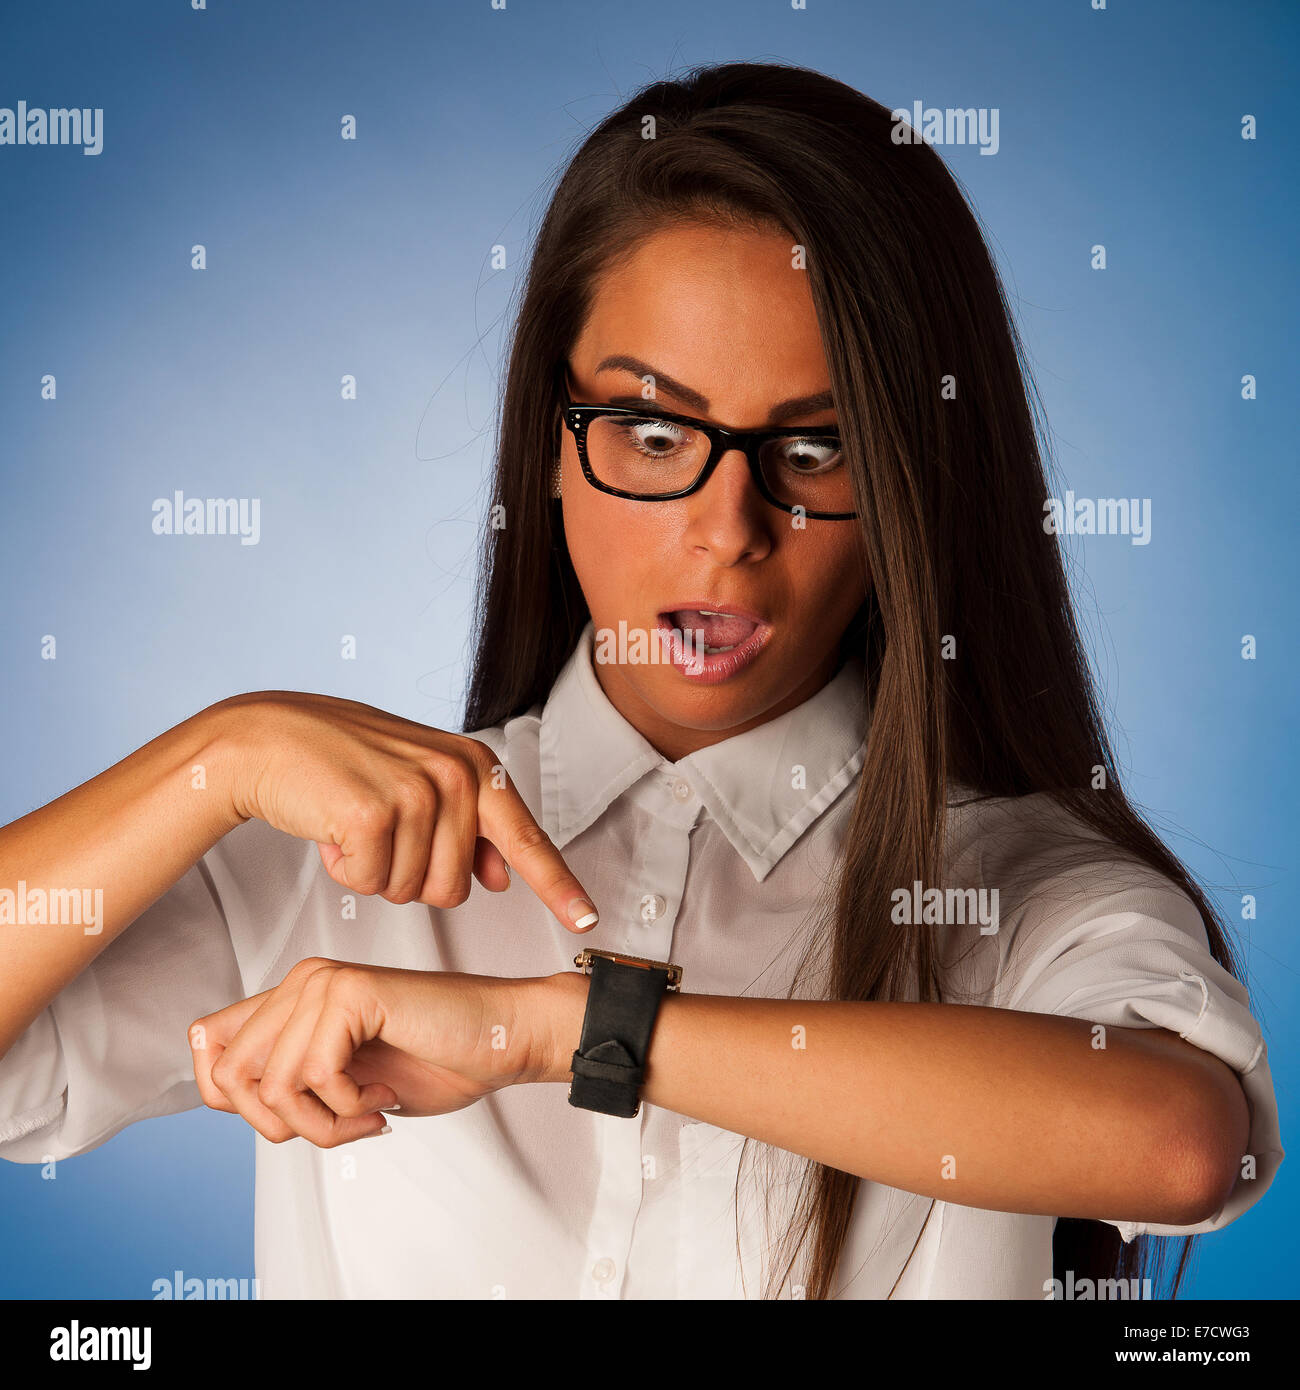 stressed woman staring into watch gesturing being late Stock Photo